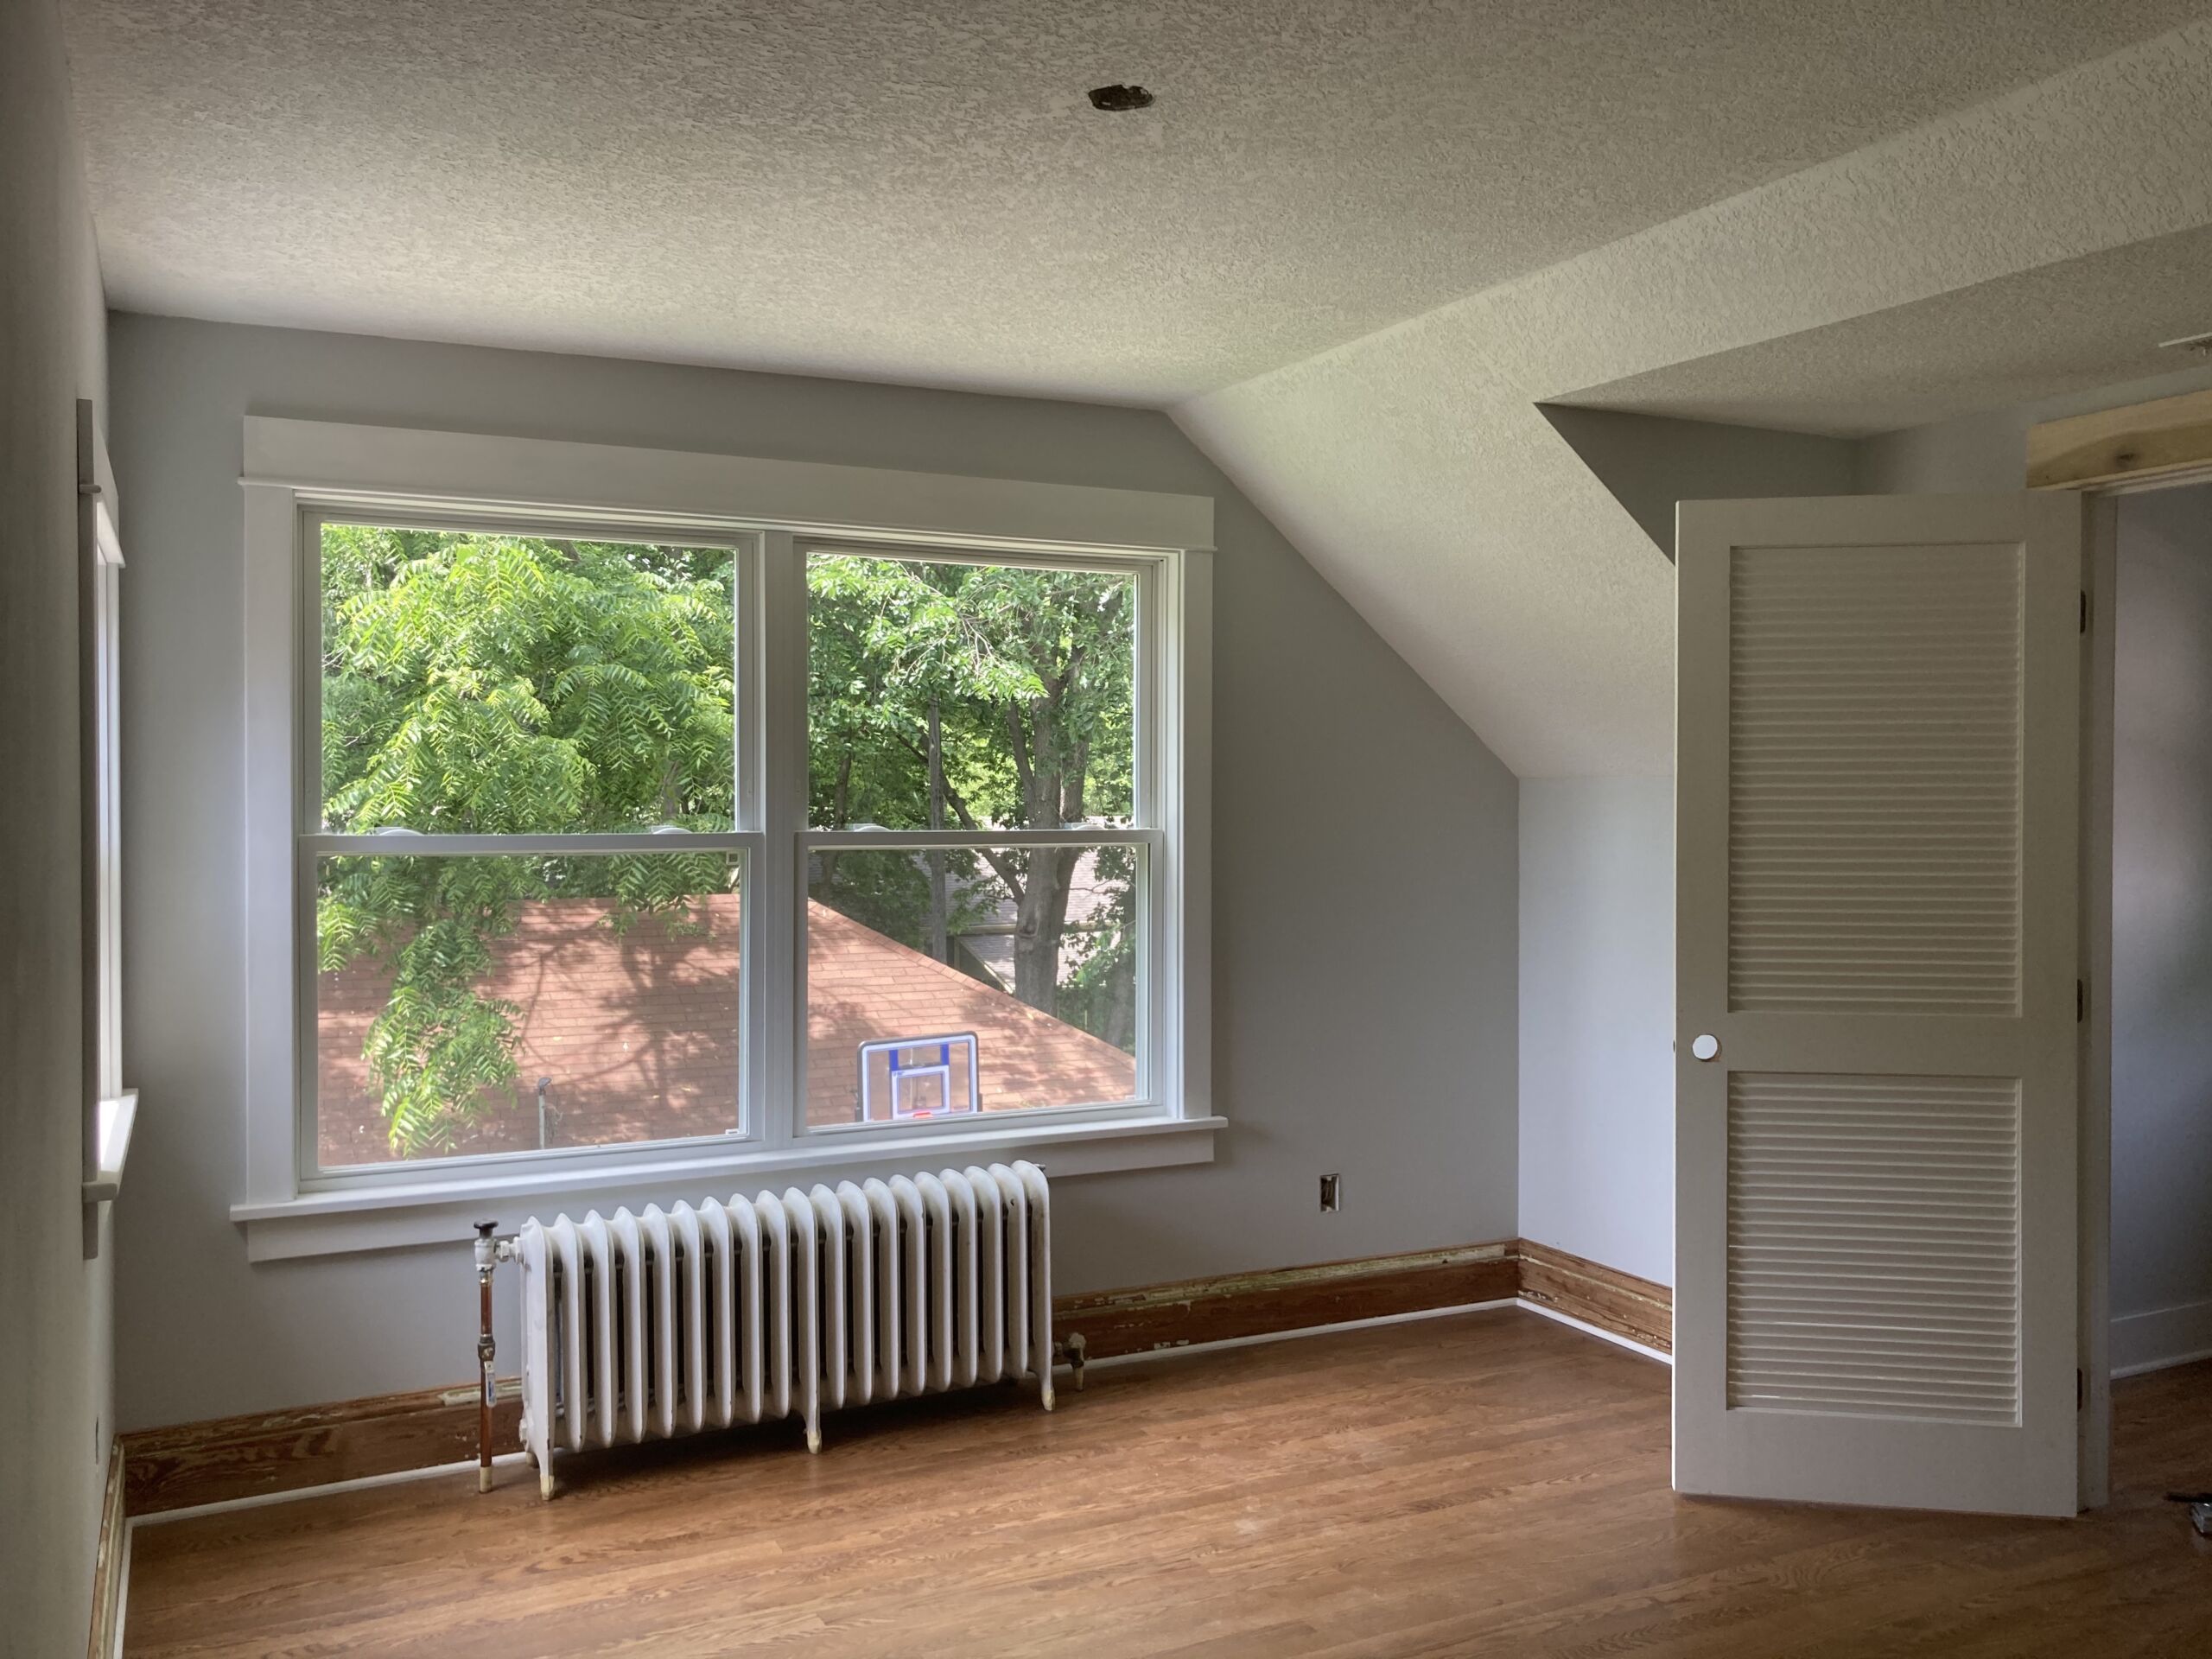 Interior of new addition; room with wooden floors and large windows